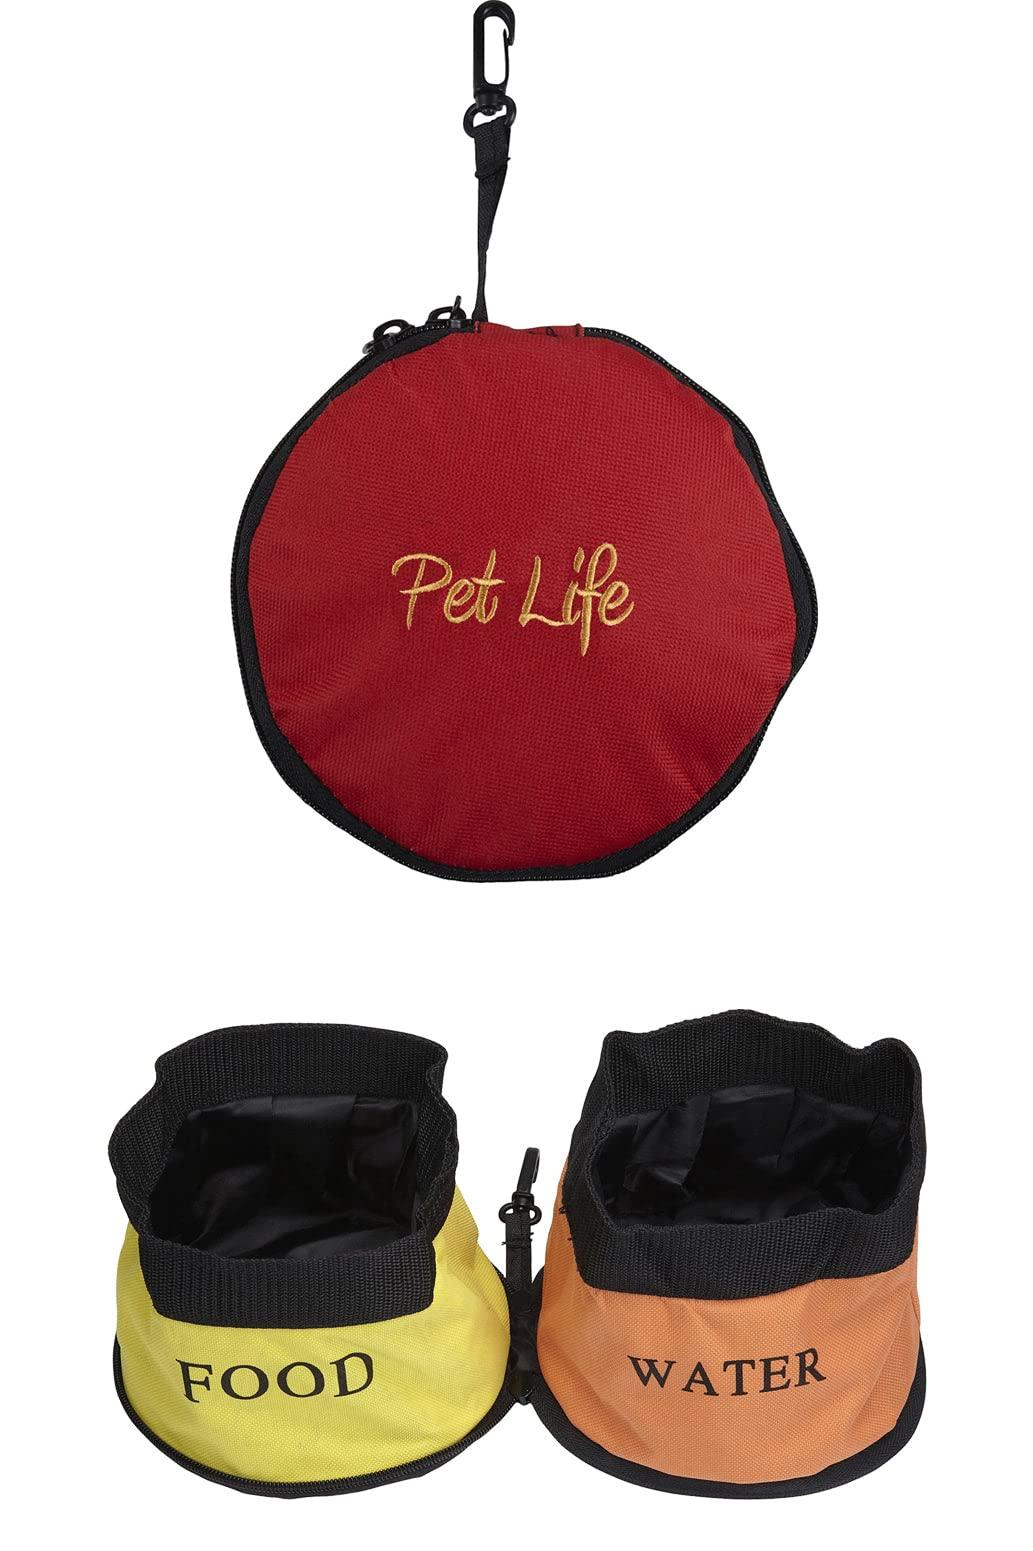 PET LIFE Dual Folding Waterproof Food and Water collapsible Folding Travel Pet cat Dog Bowl Feeder Waterer Fountain, One Size, Yellow, Orange and Red